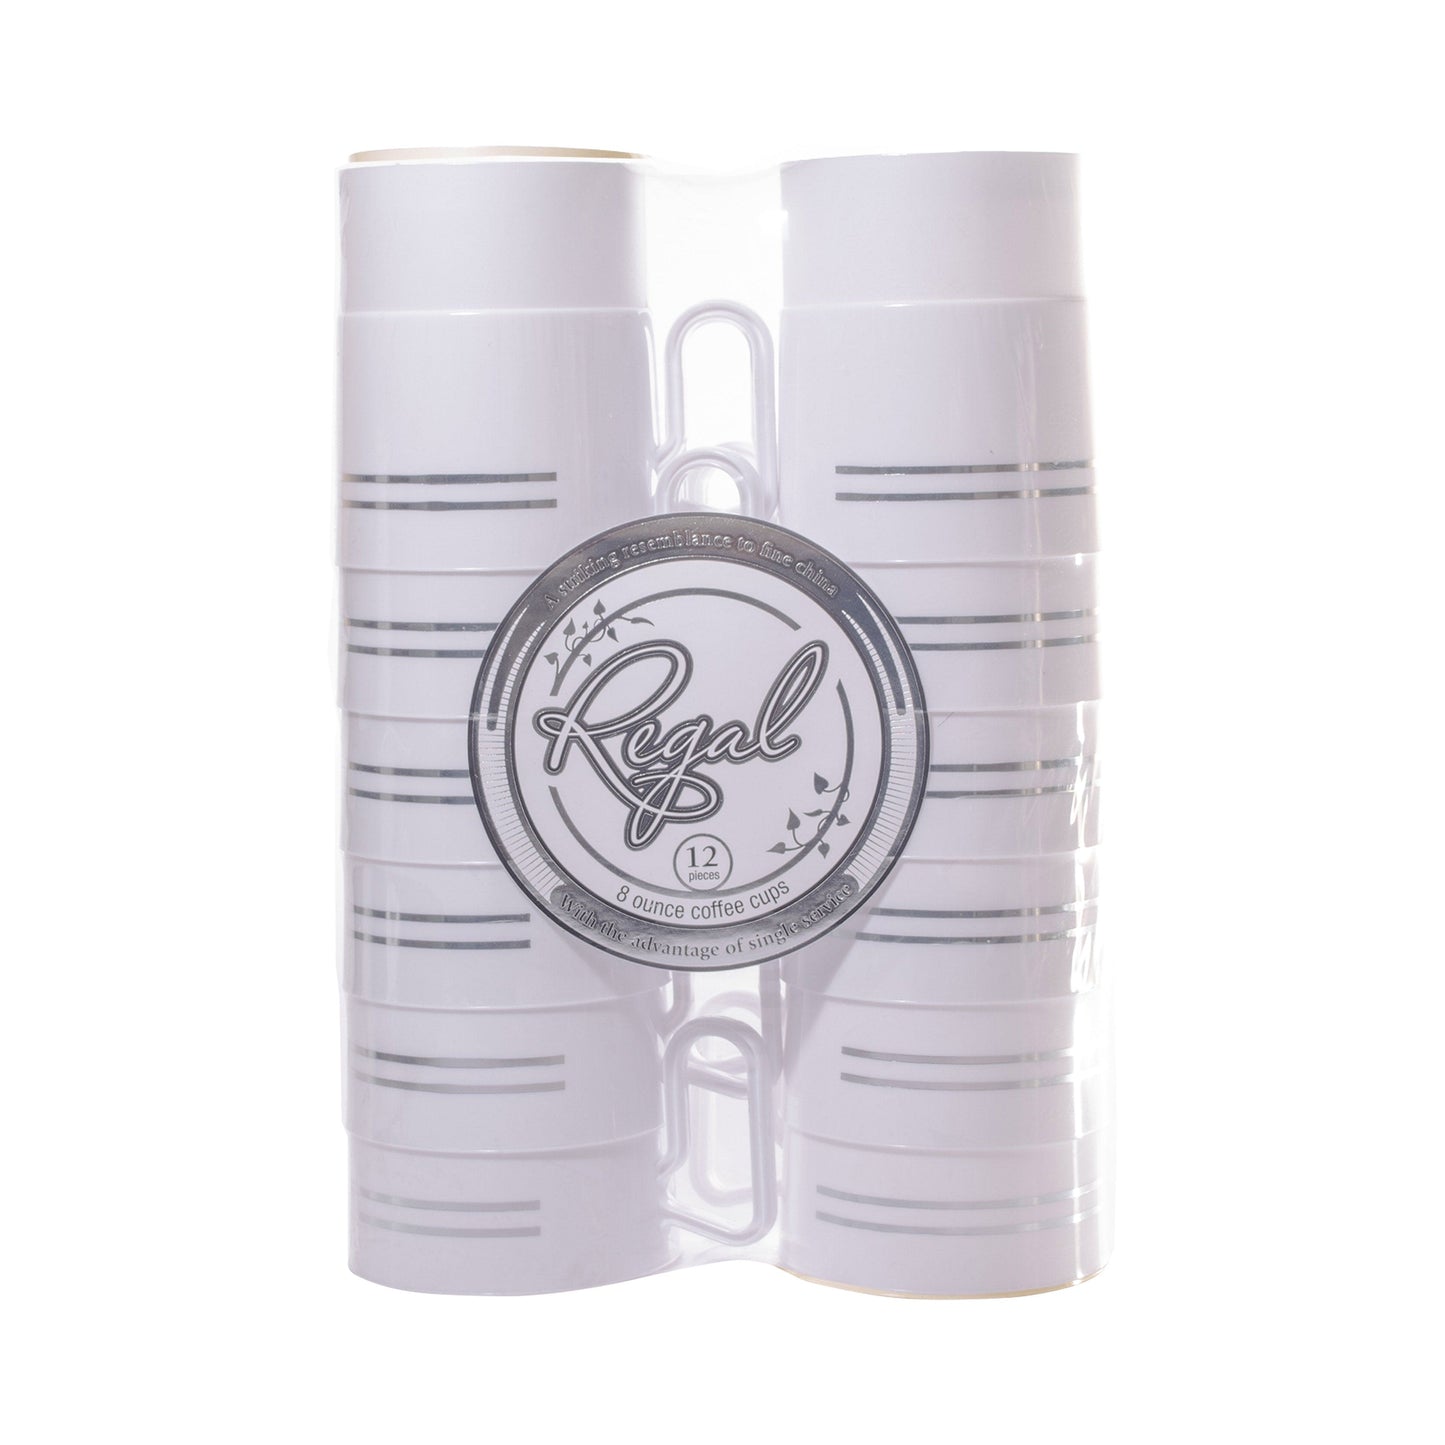 Regal 8oz White Coffee Cups with Sliver Trim 12ct